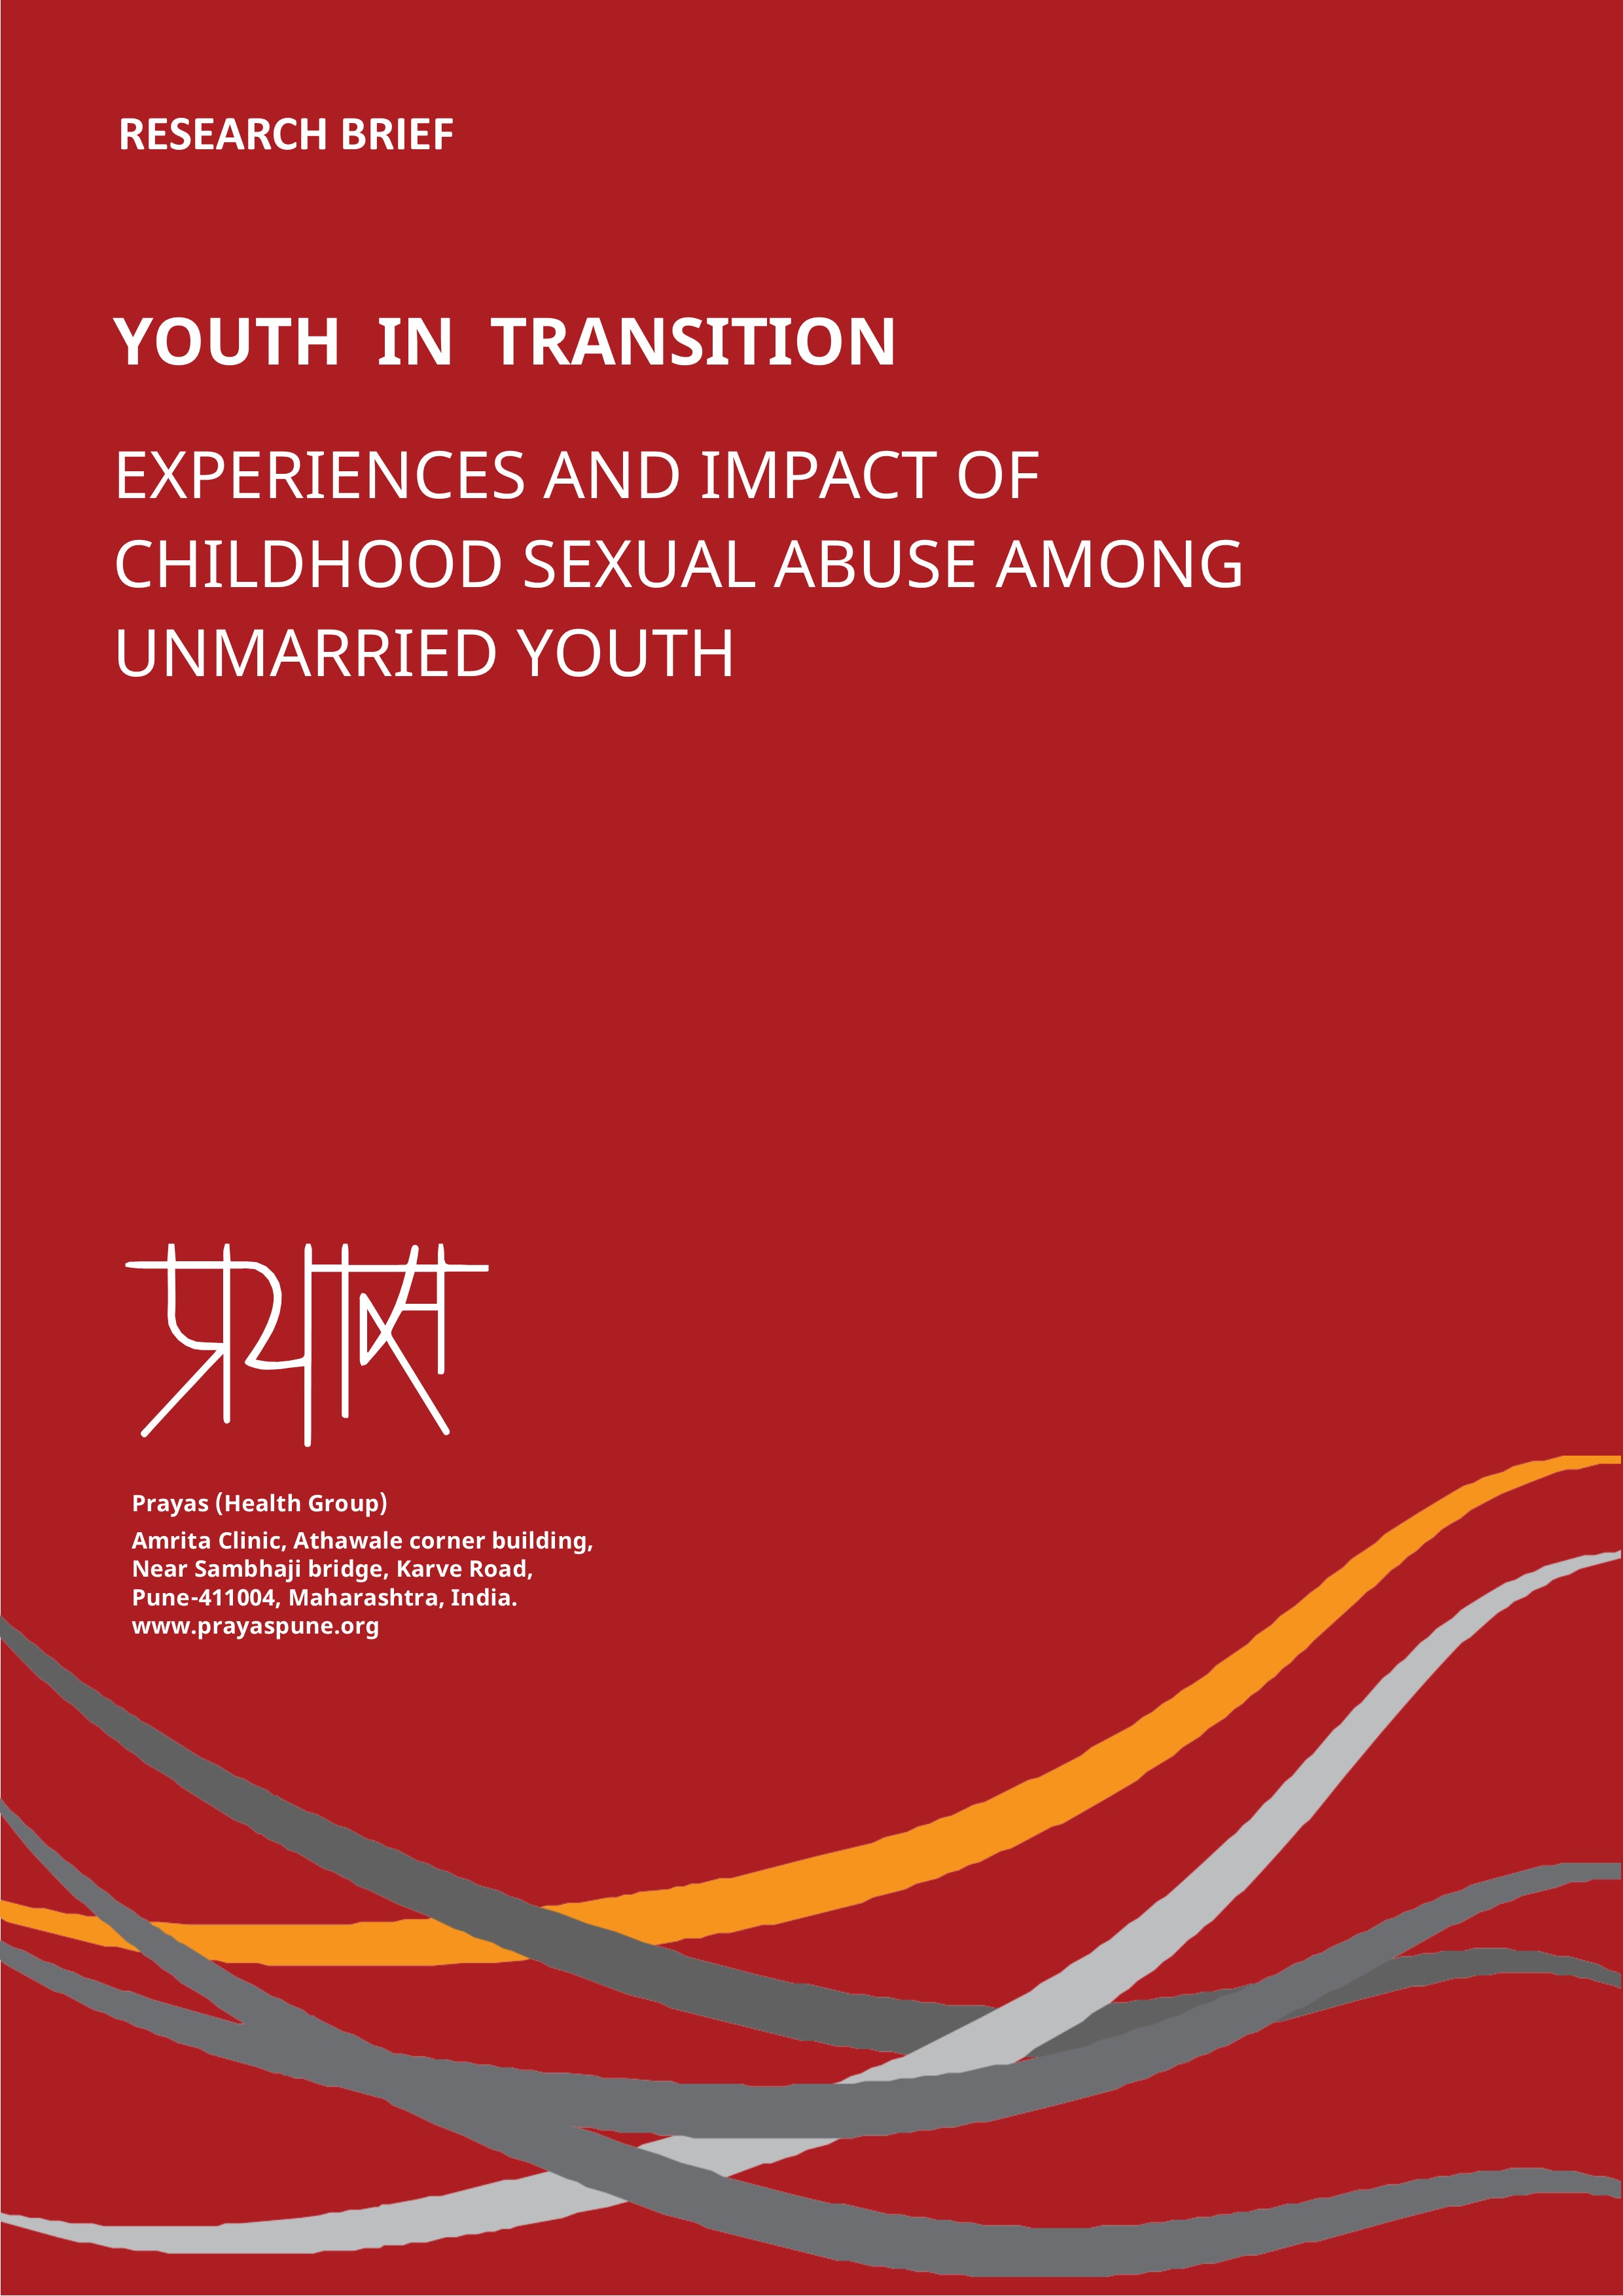 Experiences and Impact of Childhood Sexual Abuse among Unmarried Youth